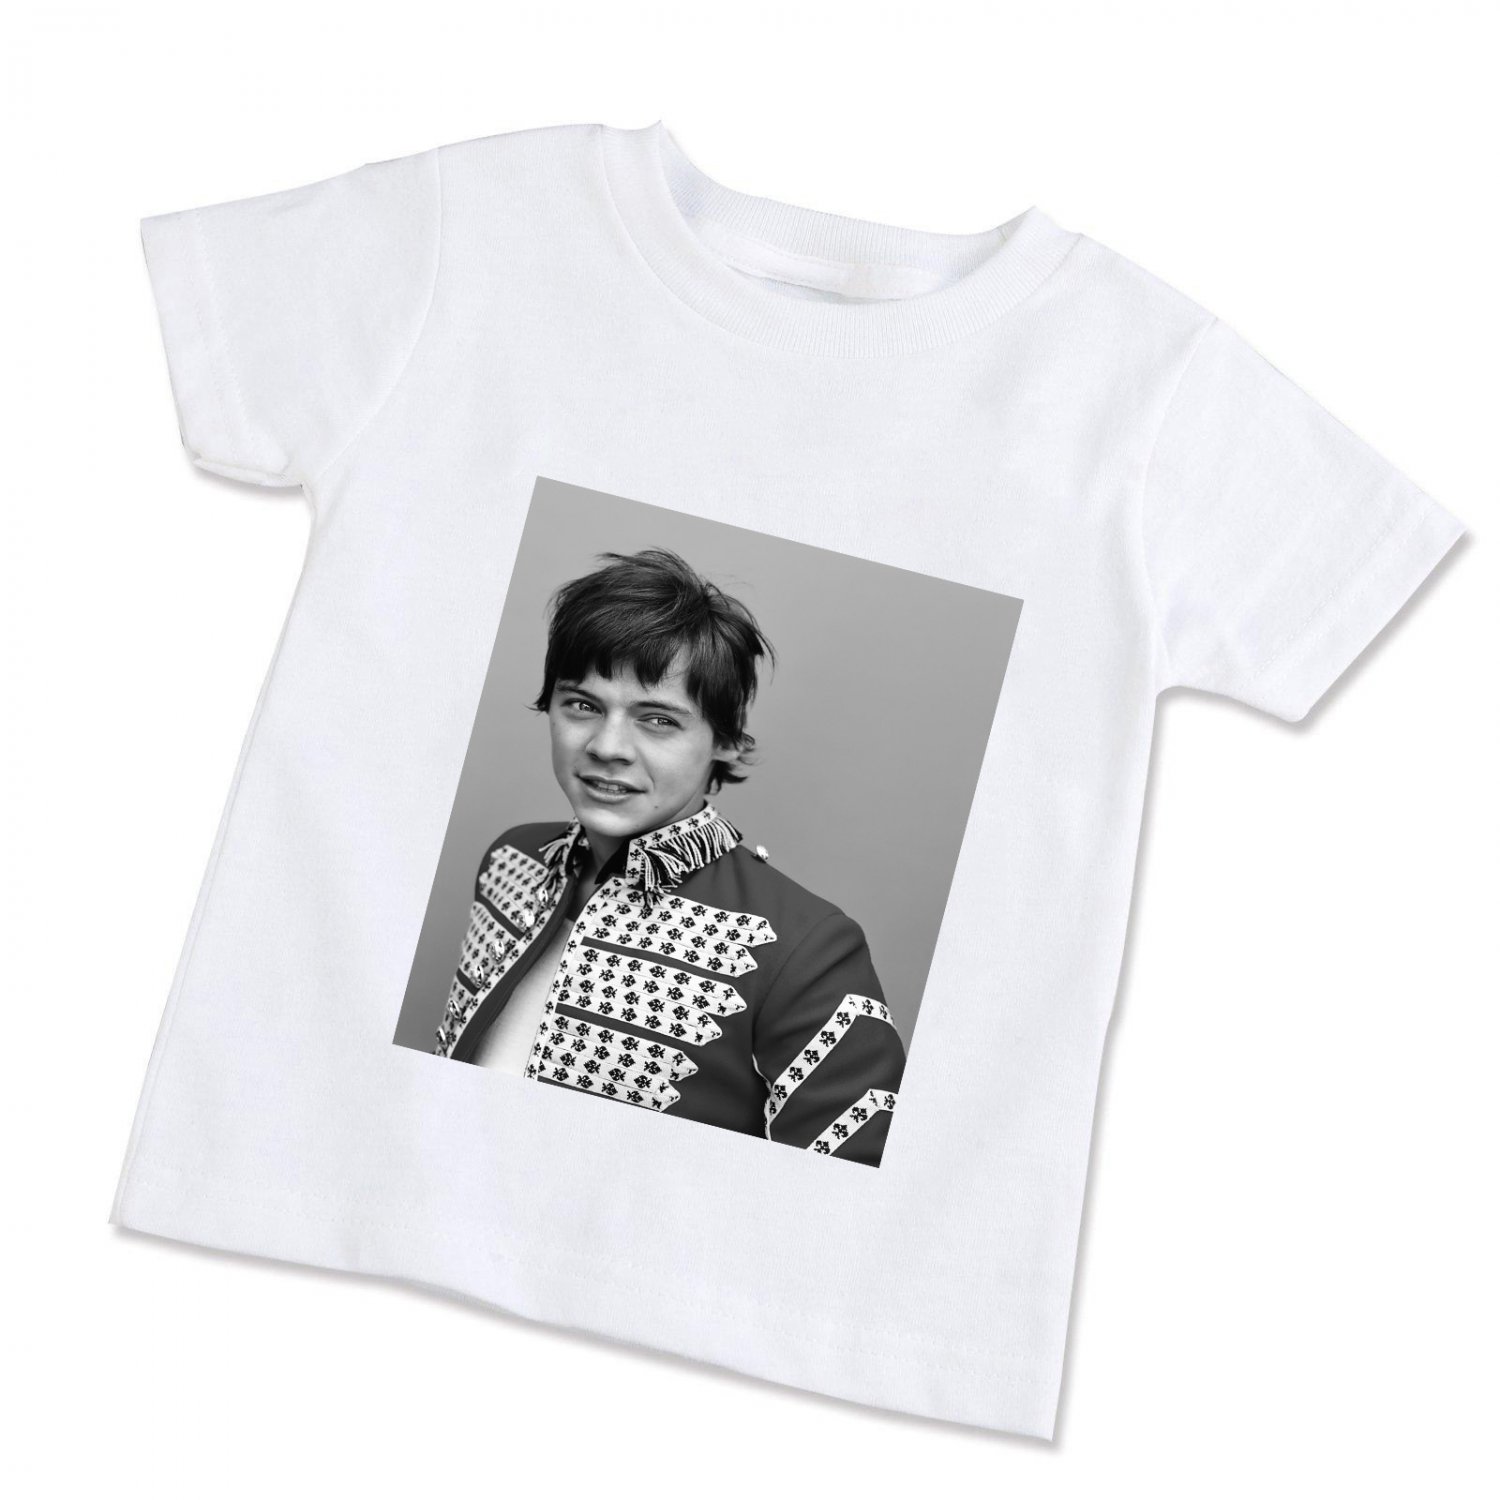 Harry Styles   Unisex Children T-Shirt (Available in XS/S/M/L)